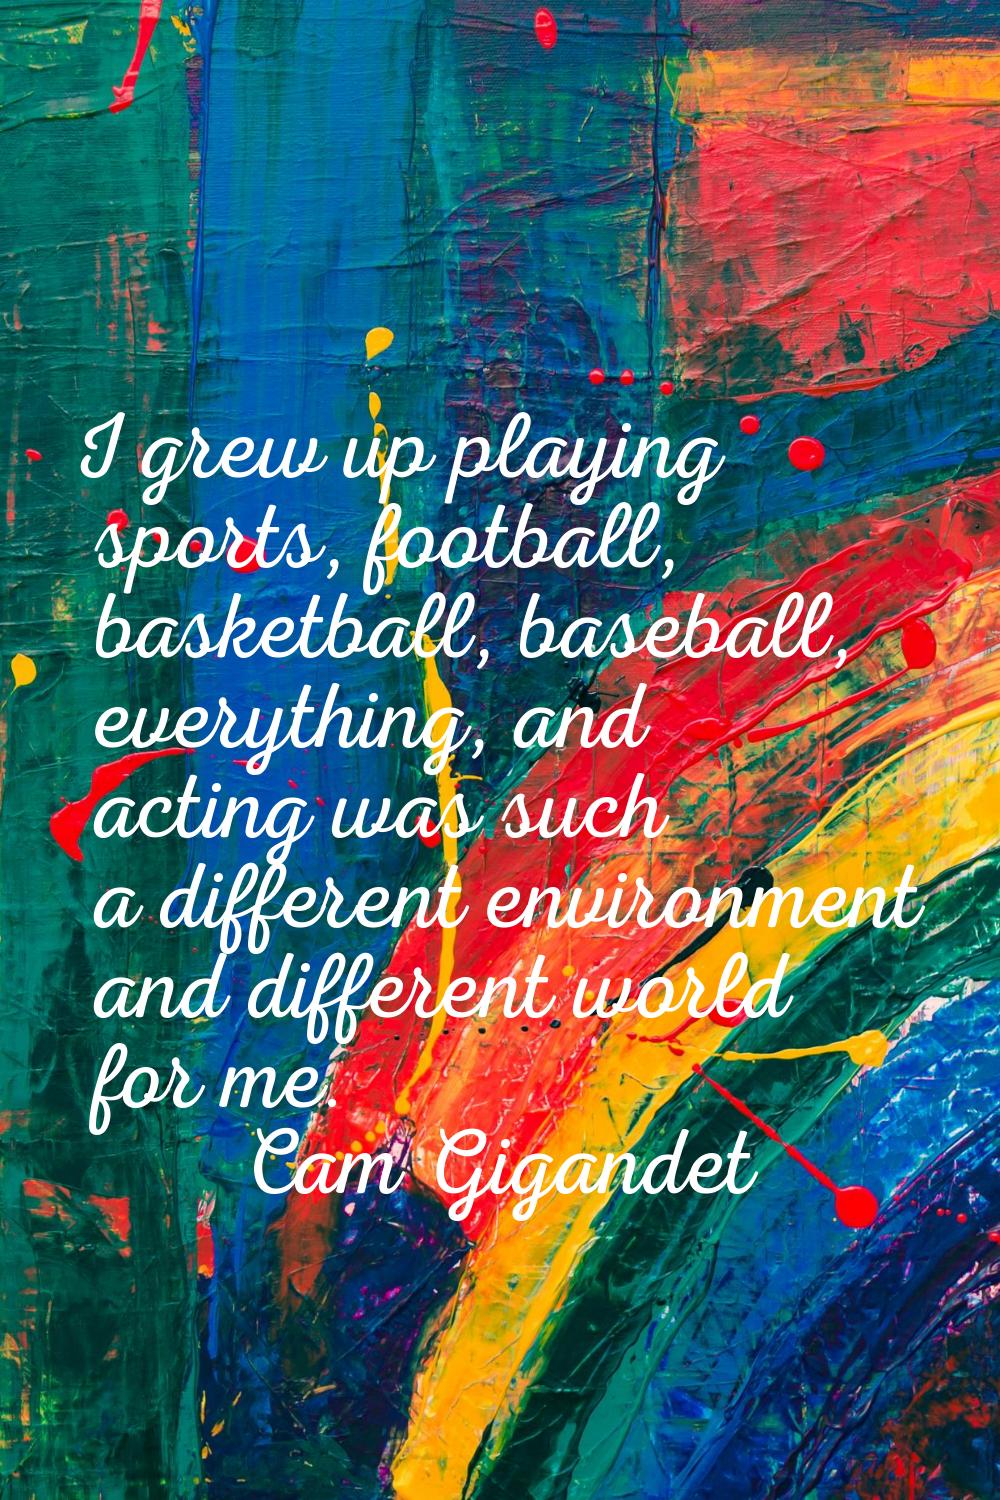 I grew up playing sports, football, basketball, baseball, everything, and acting was such a differe